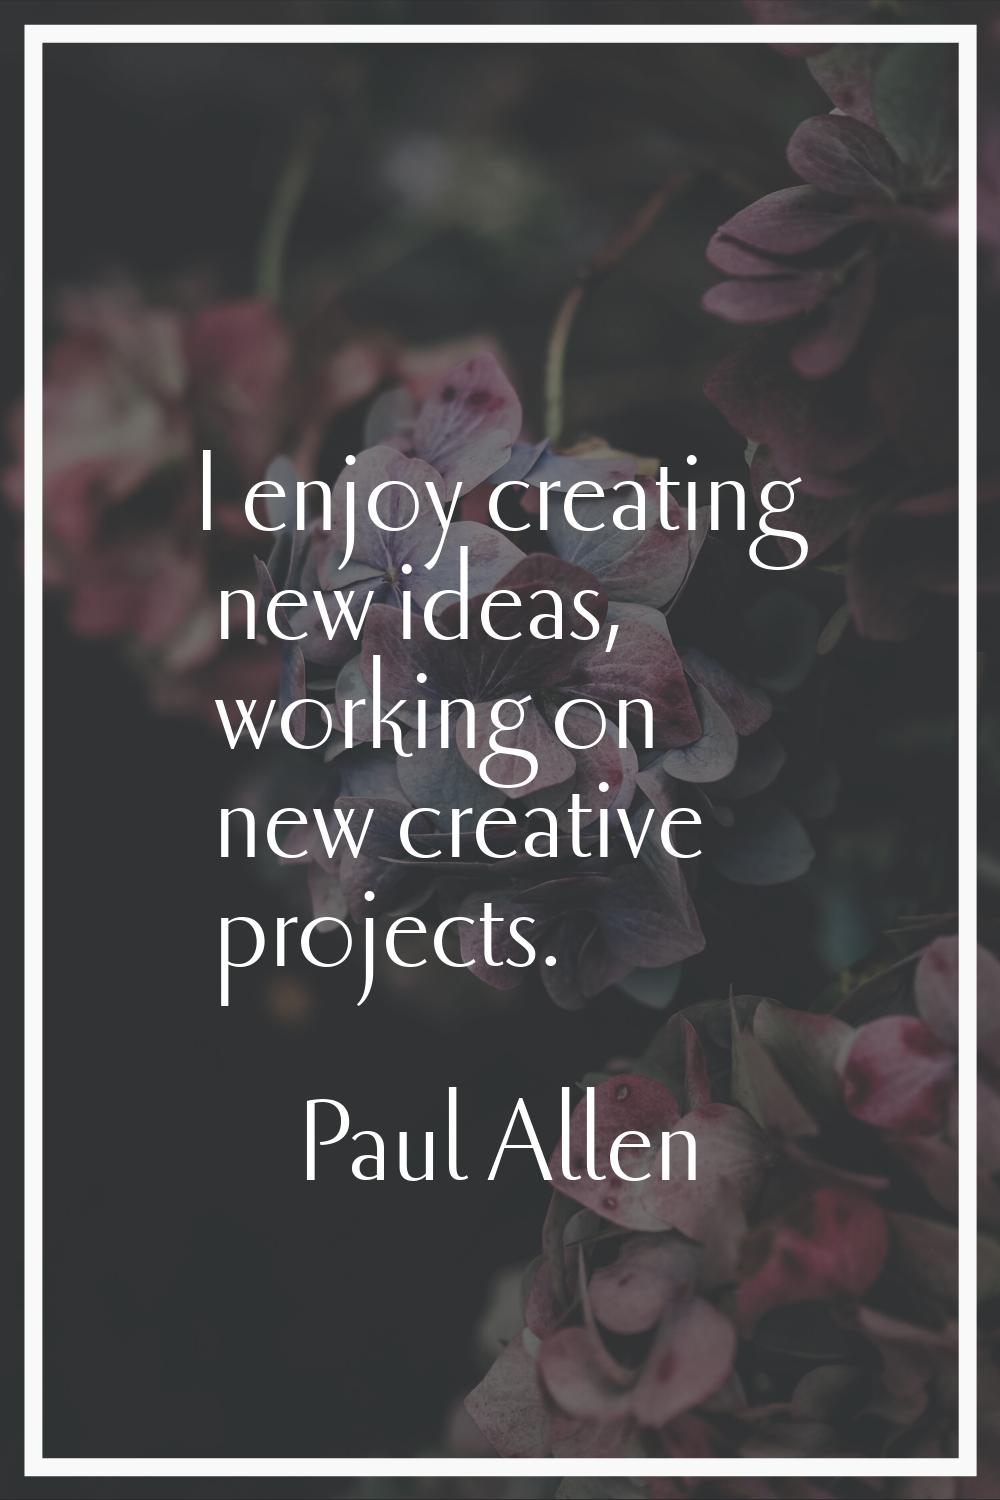 I enjoy creating new ideas, working on new creative projects.